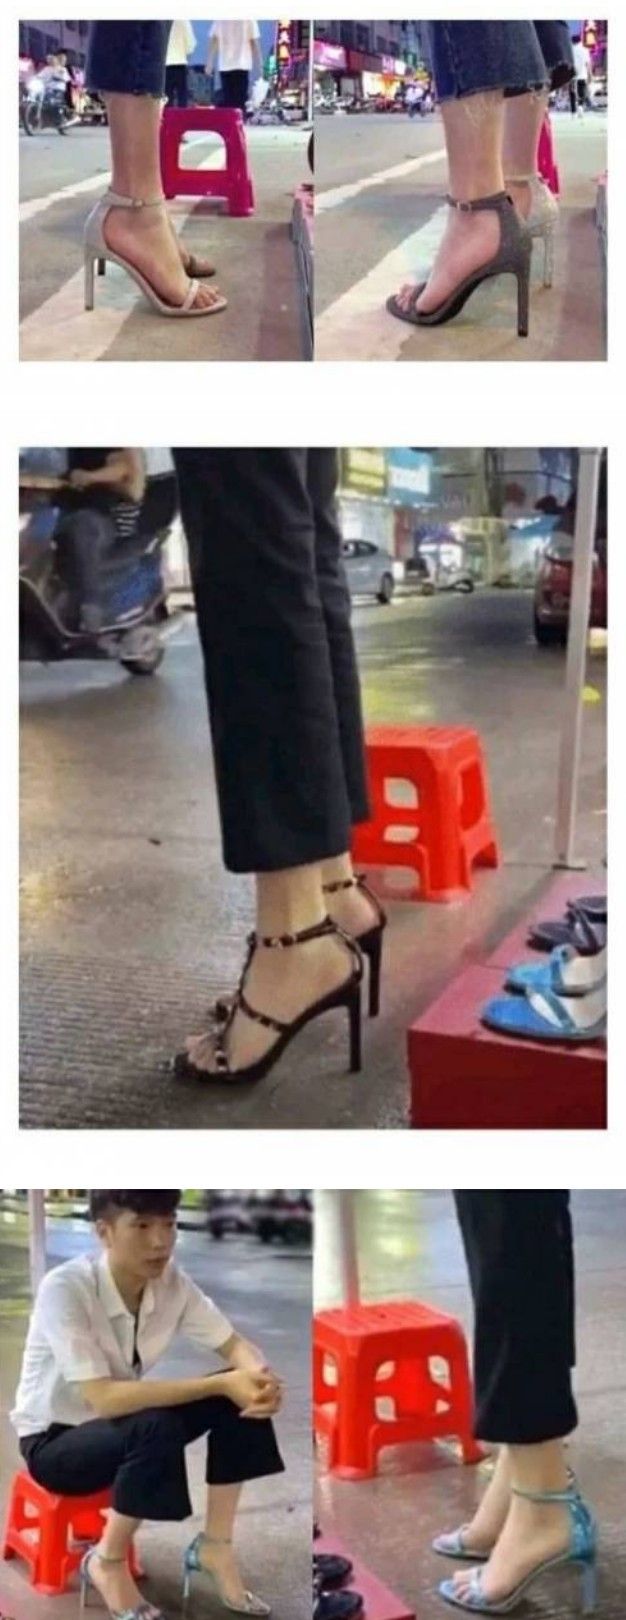 The owner of the shoe store who ordered high heels sold out.jpg